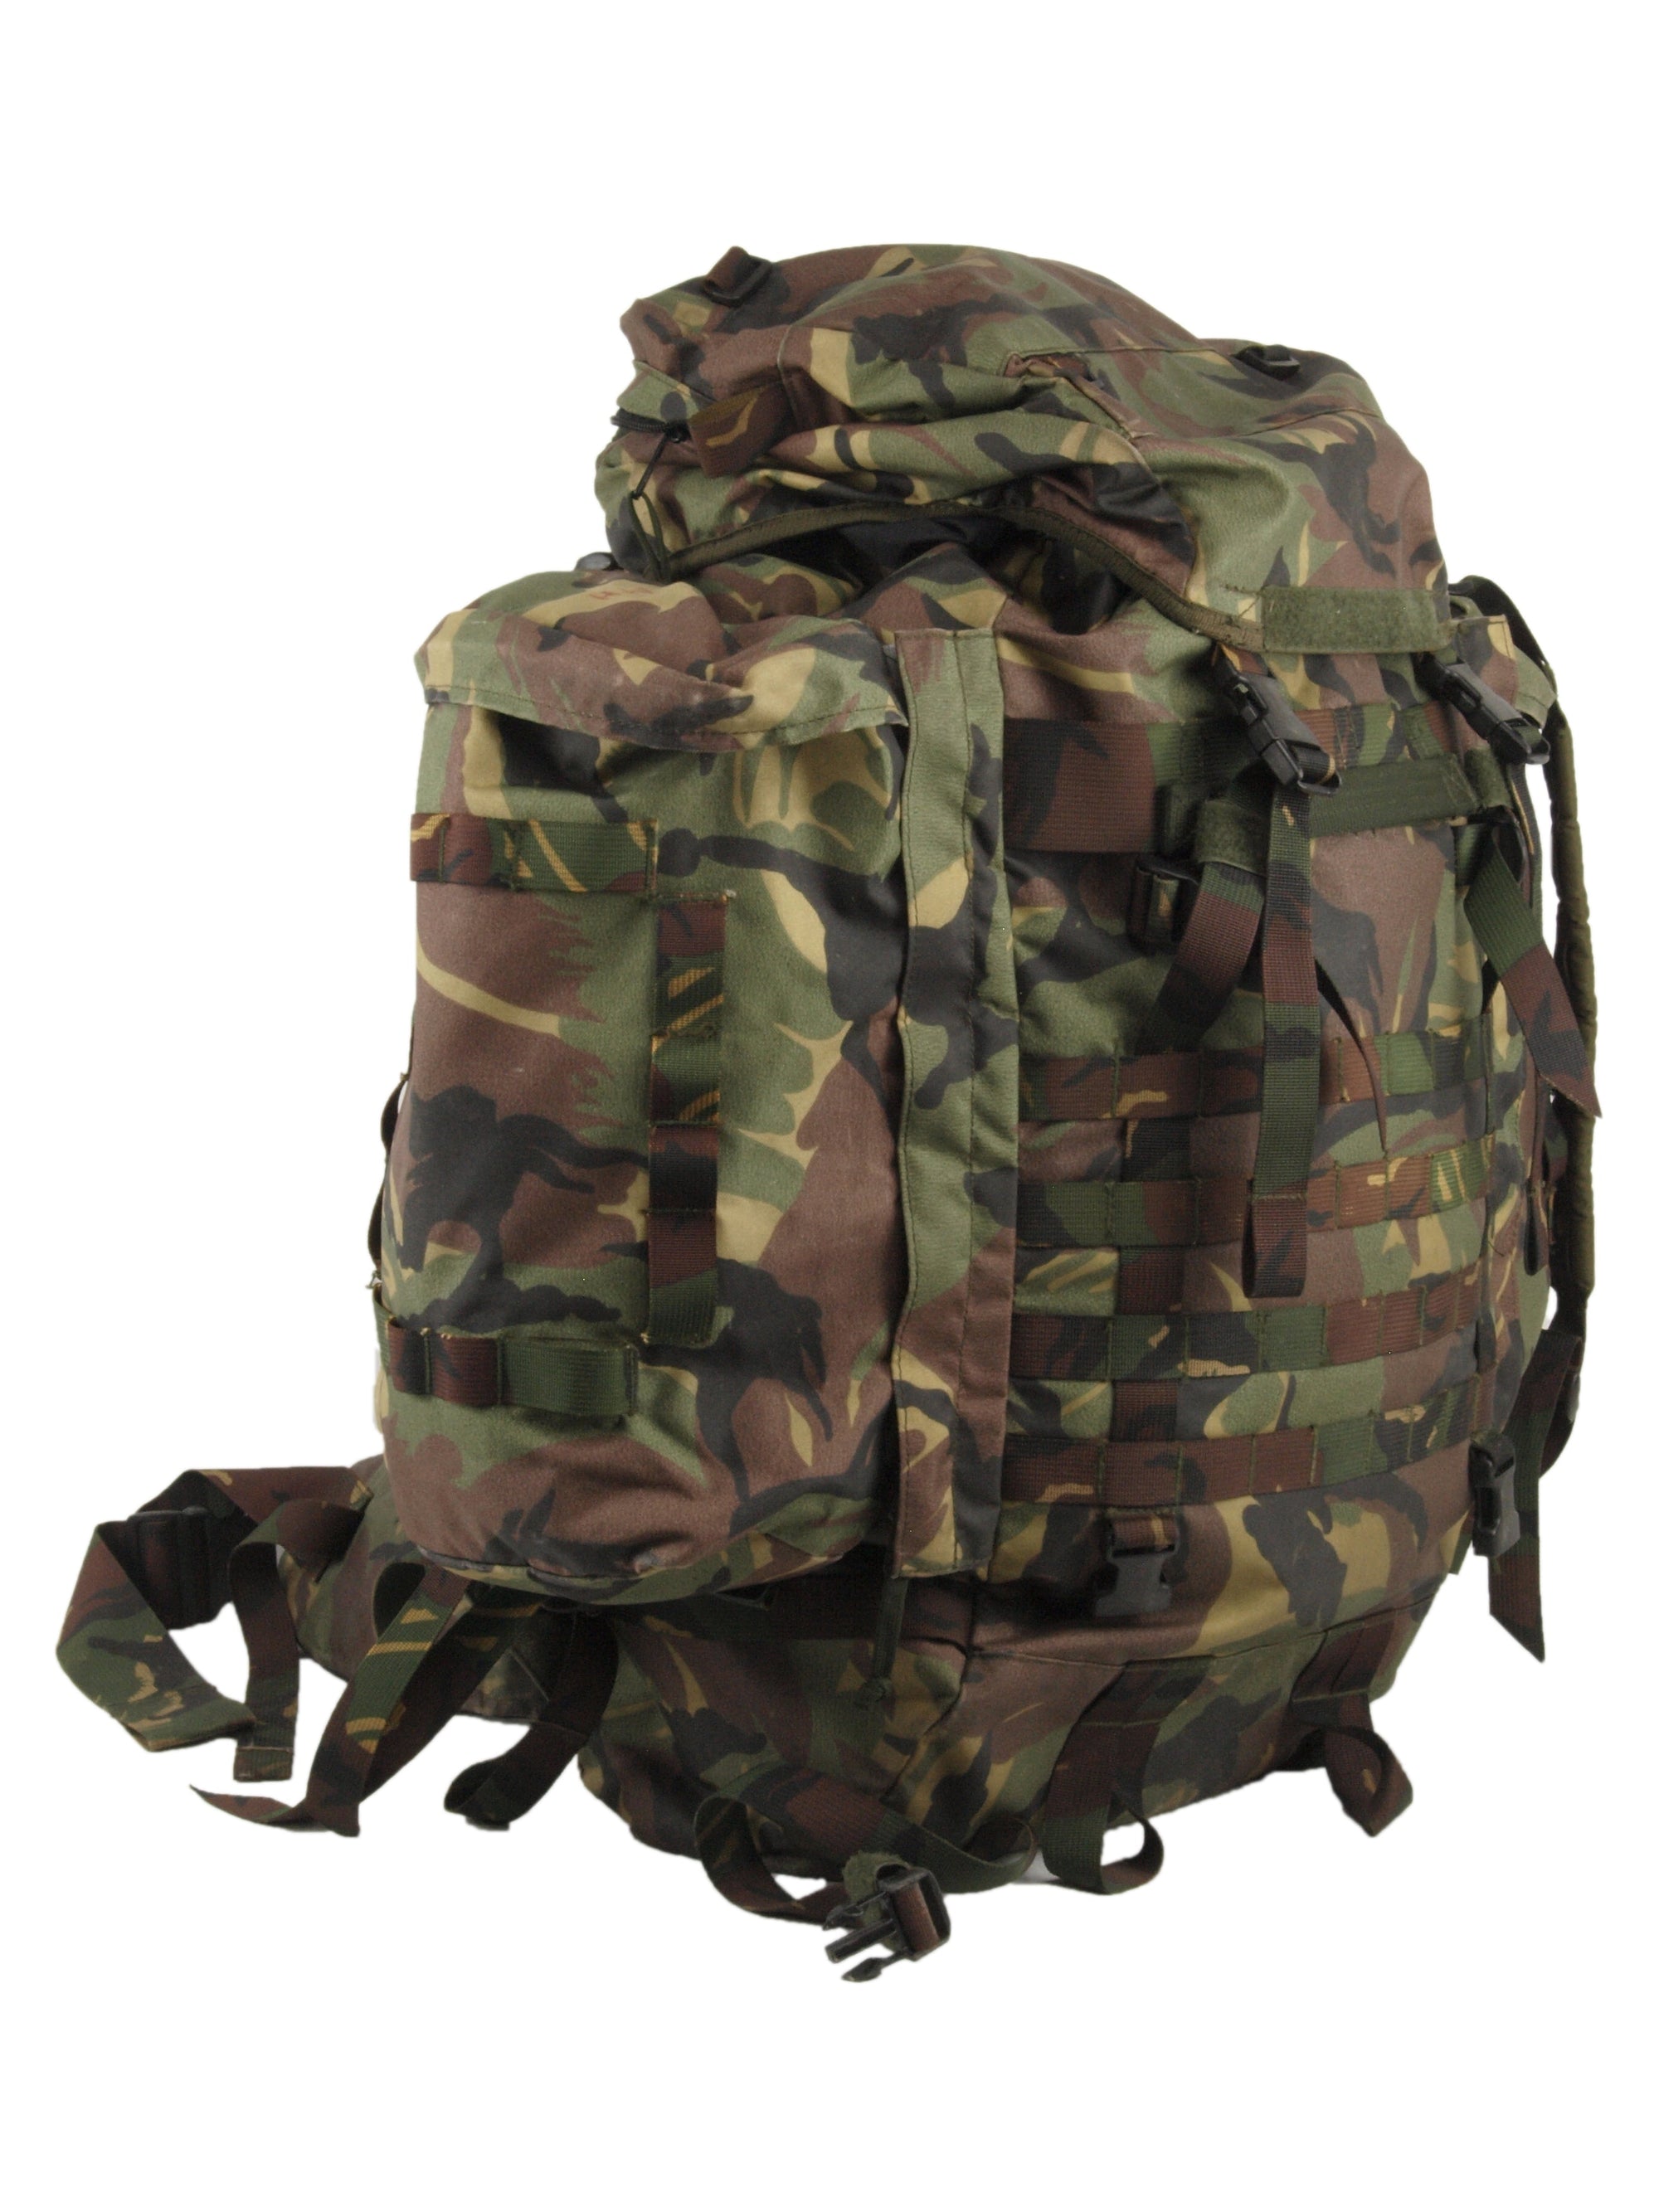 Military and Army Surplus Rucksacks and Bags